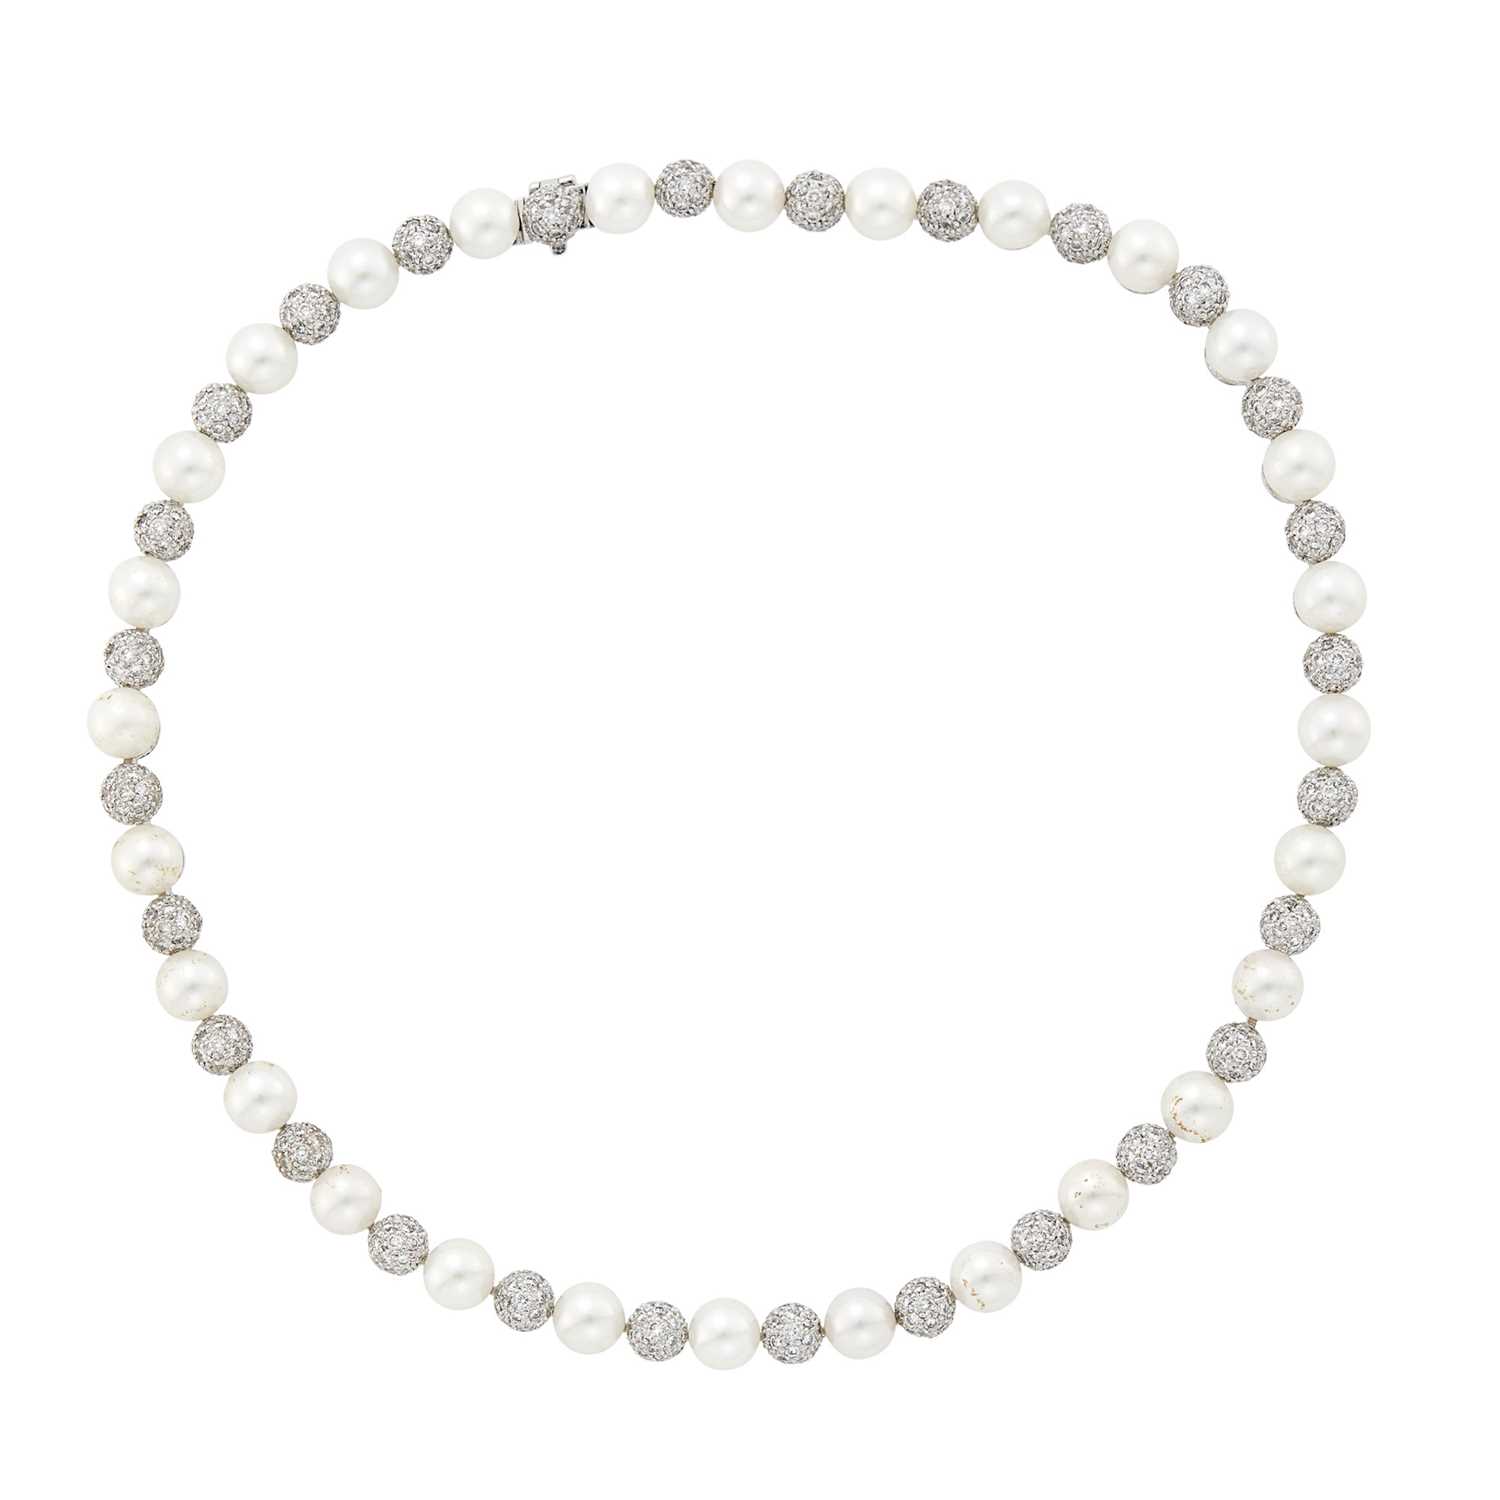 Lot 50 - White Gold, Cultured Pearl and Diamond Necklace